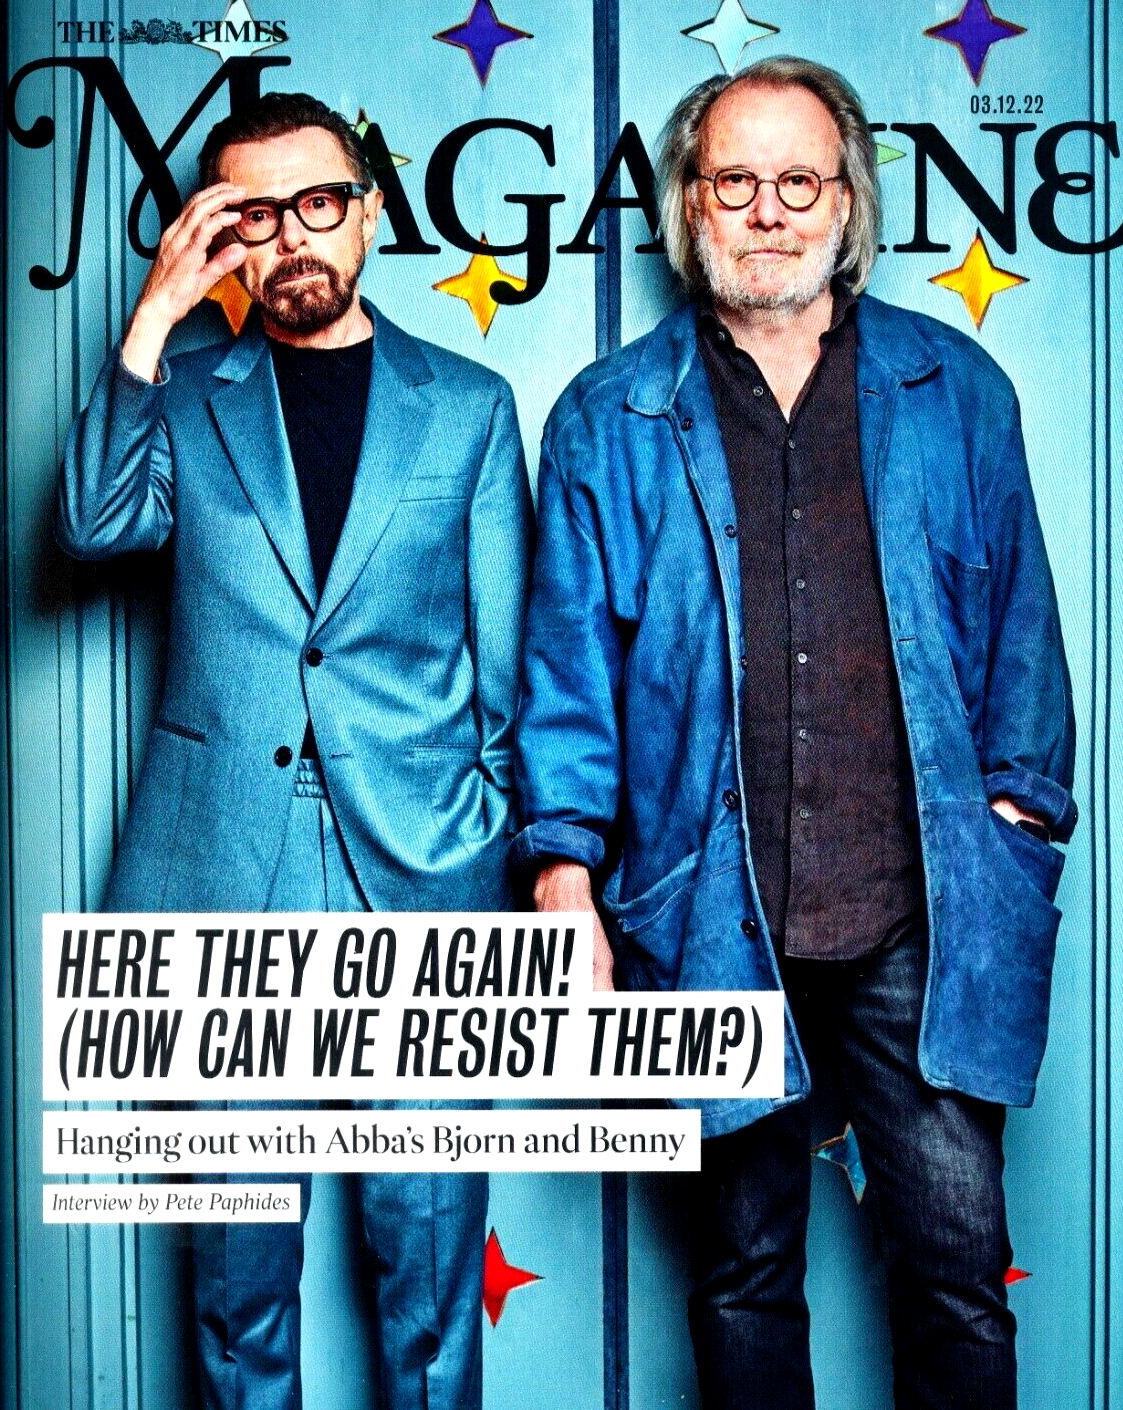 BENNY ANDERSON & BJORN ULVAES ABBA The Times Magazine 3rd December 2022